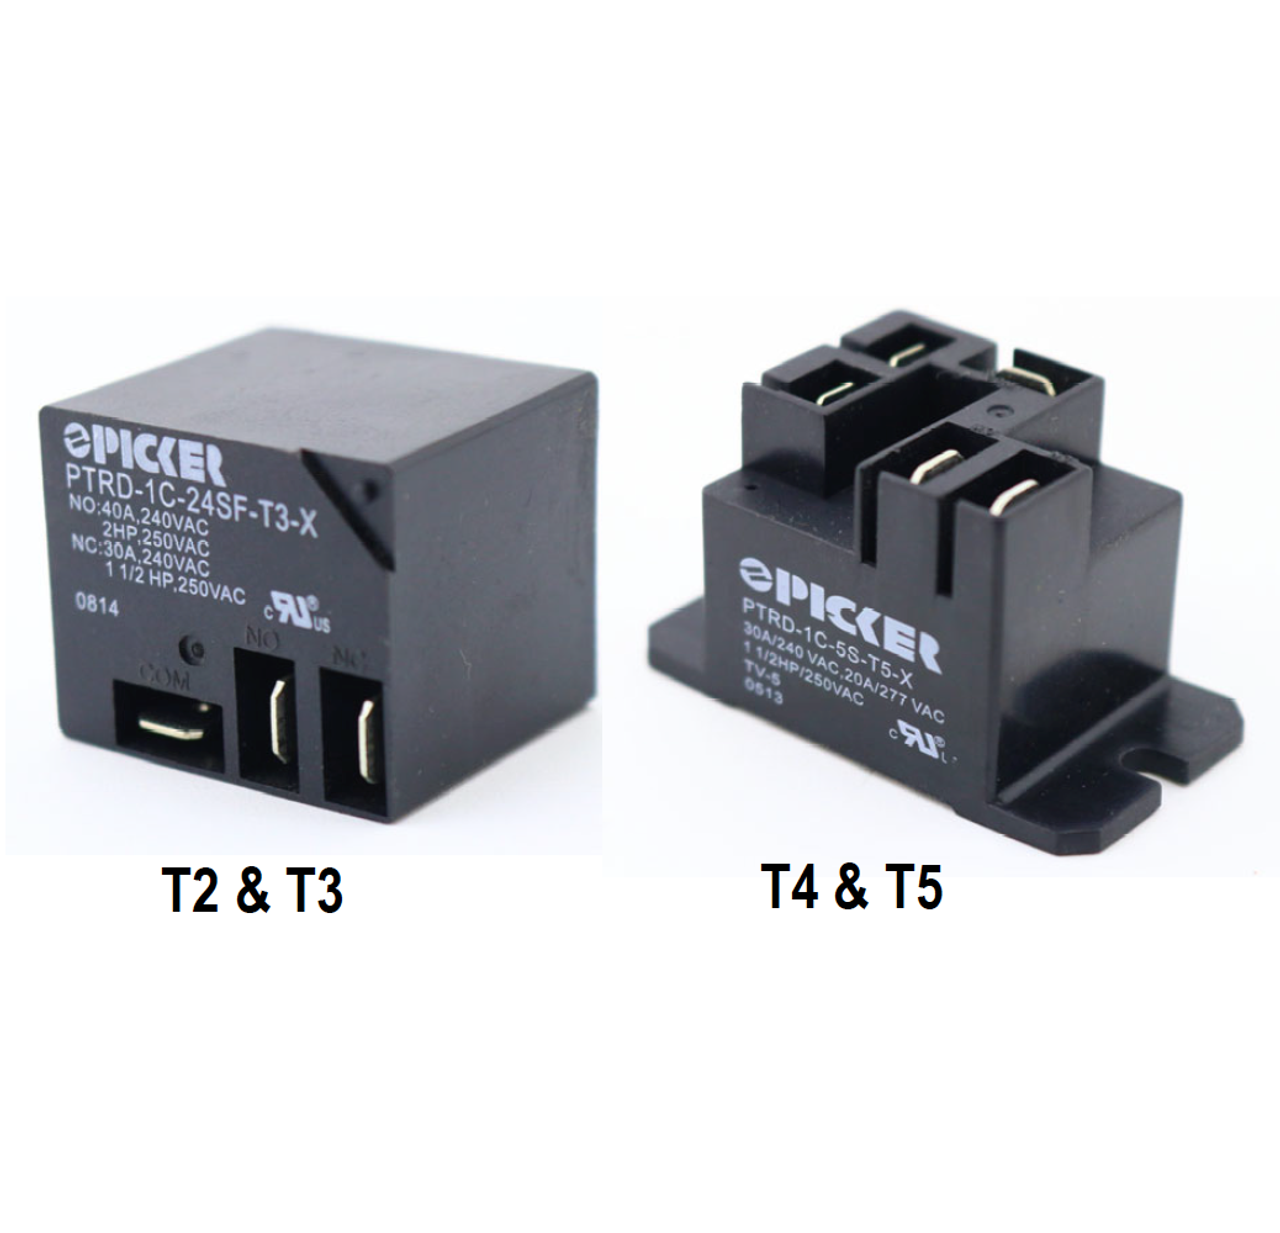 Picker PTRD-1A-9CT-T3-X-0.6G Power Relays